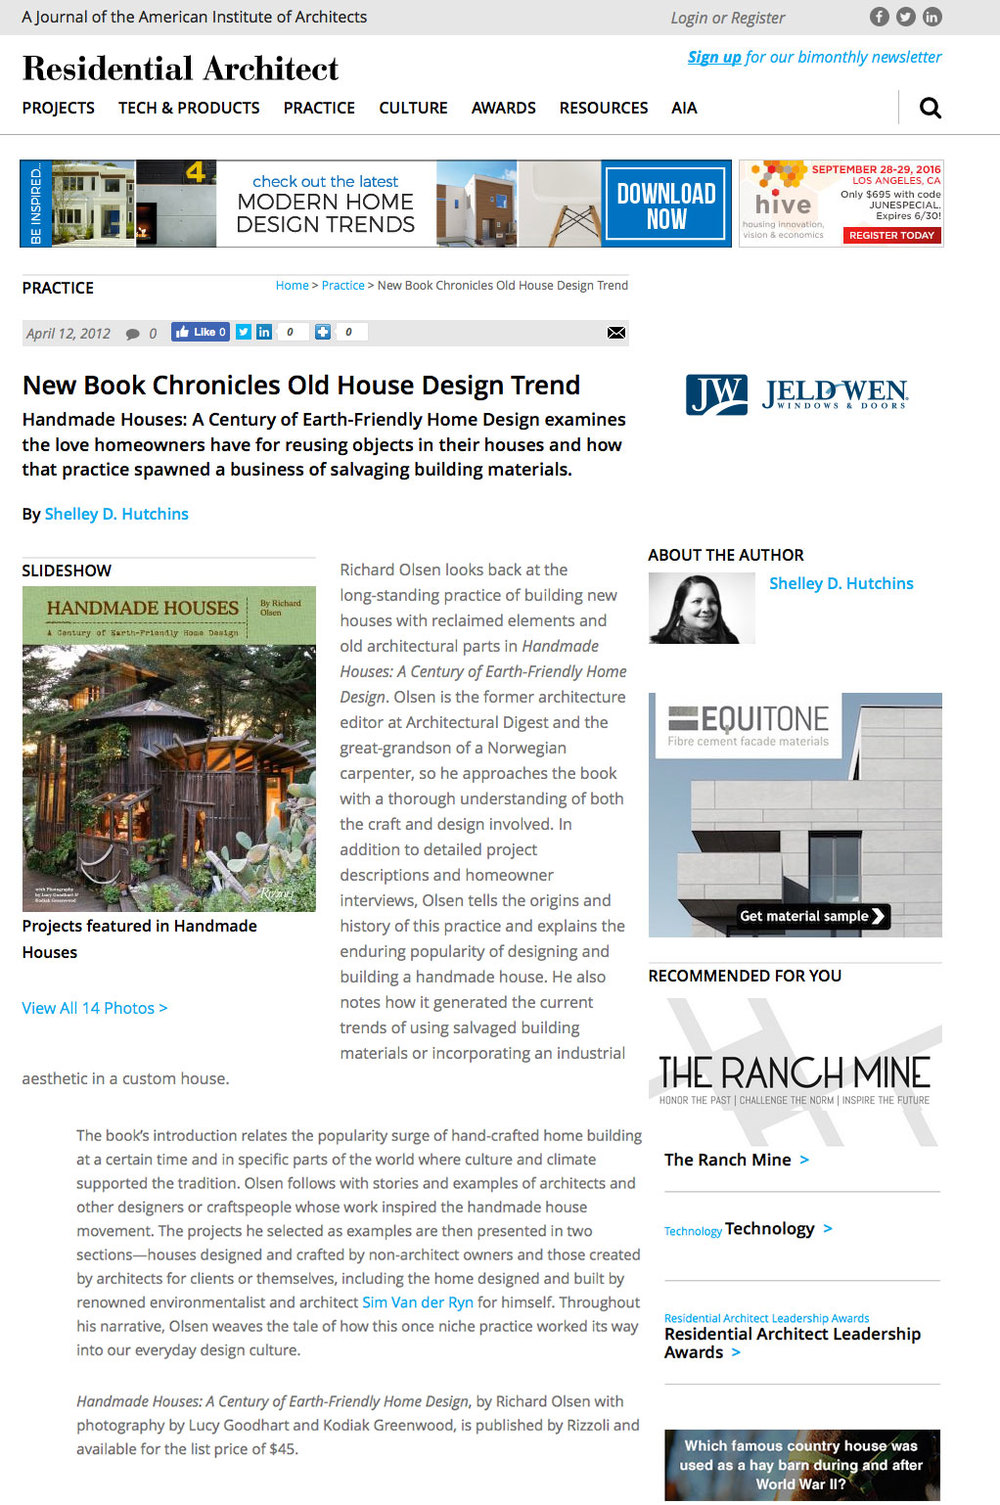    Handmade Houses   reviewed by Shelley D. Hutchins in   Residential Architect  , April 12, 2012.   